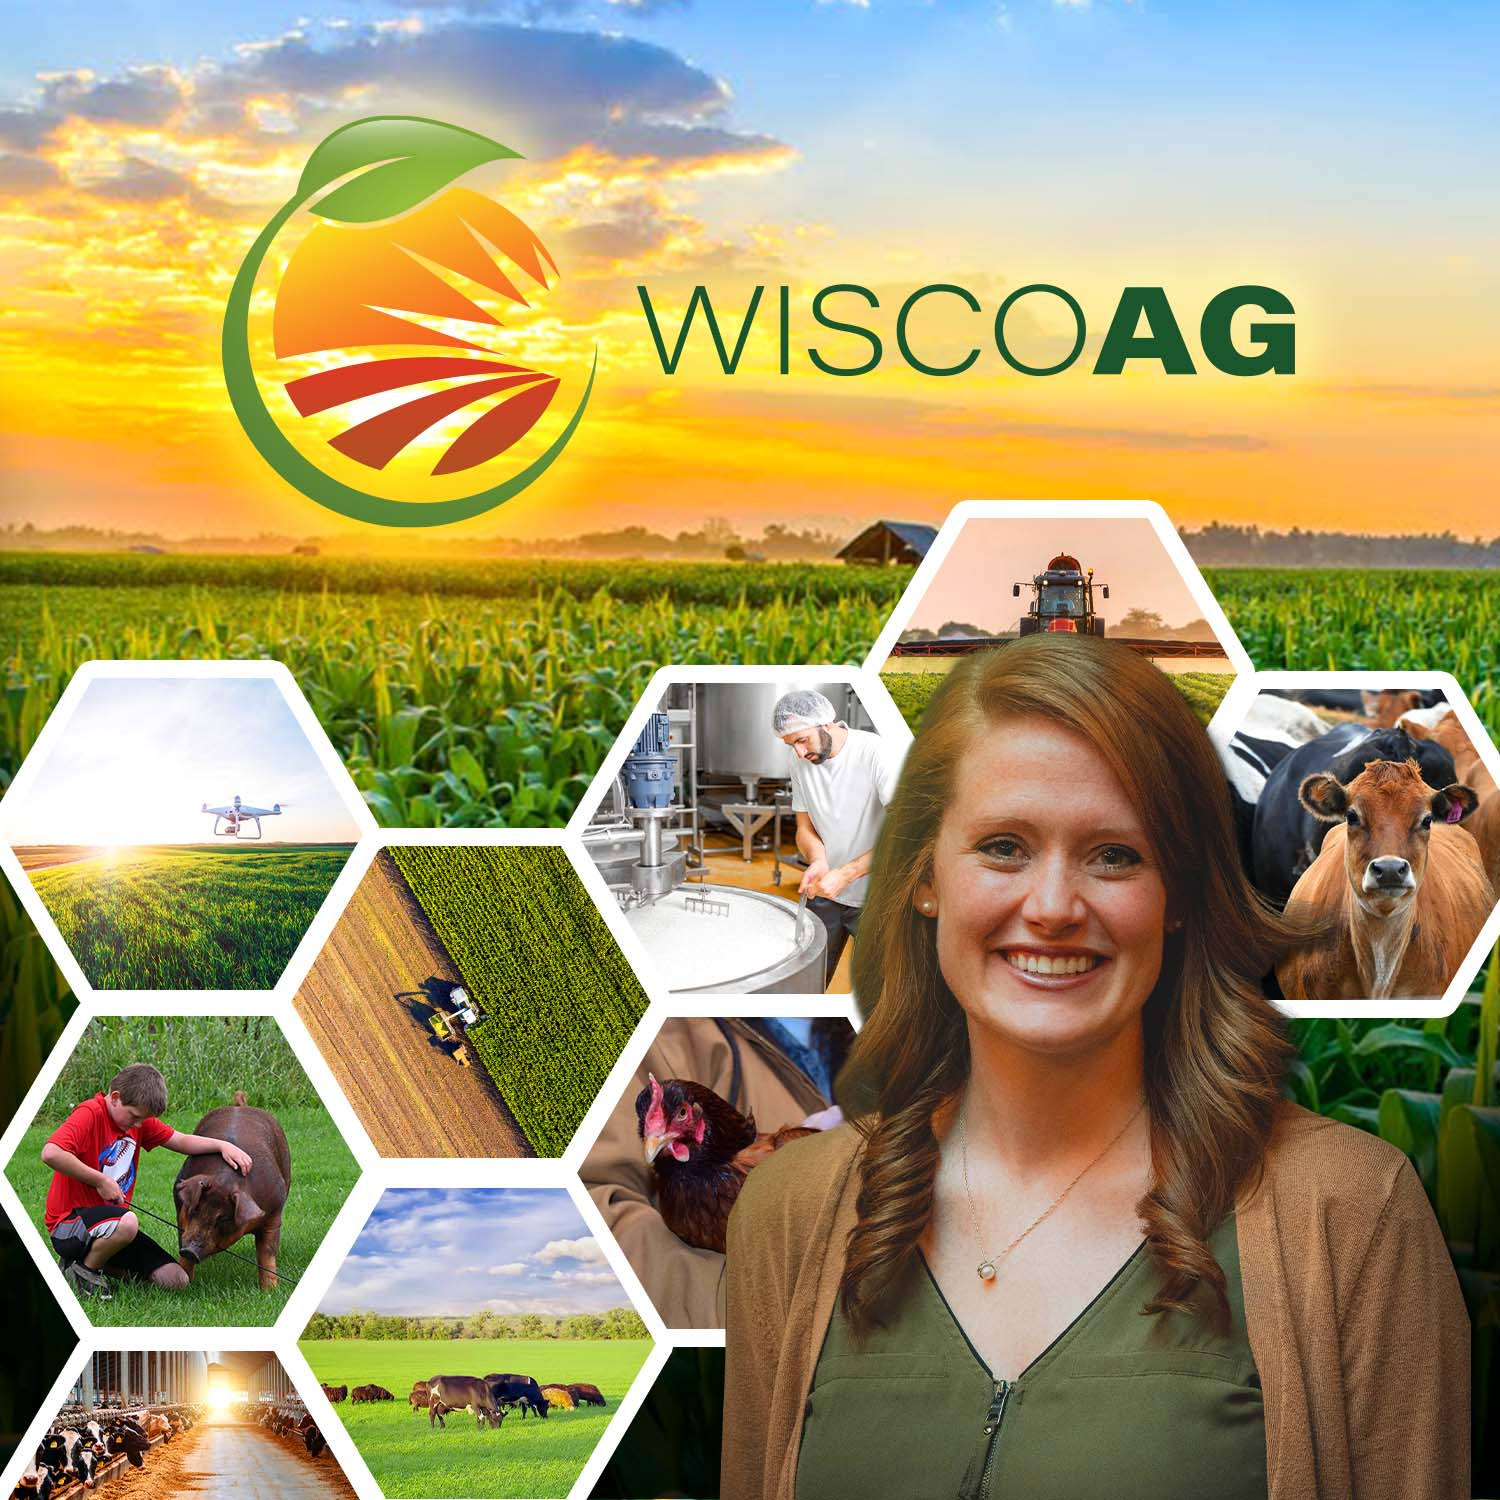 Report: About the Outagamie Breakfast on the Farm June 11